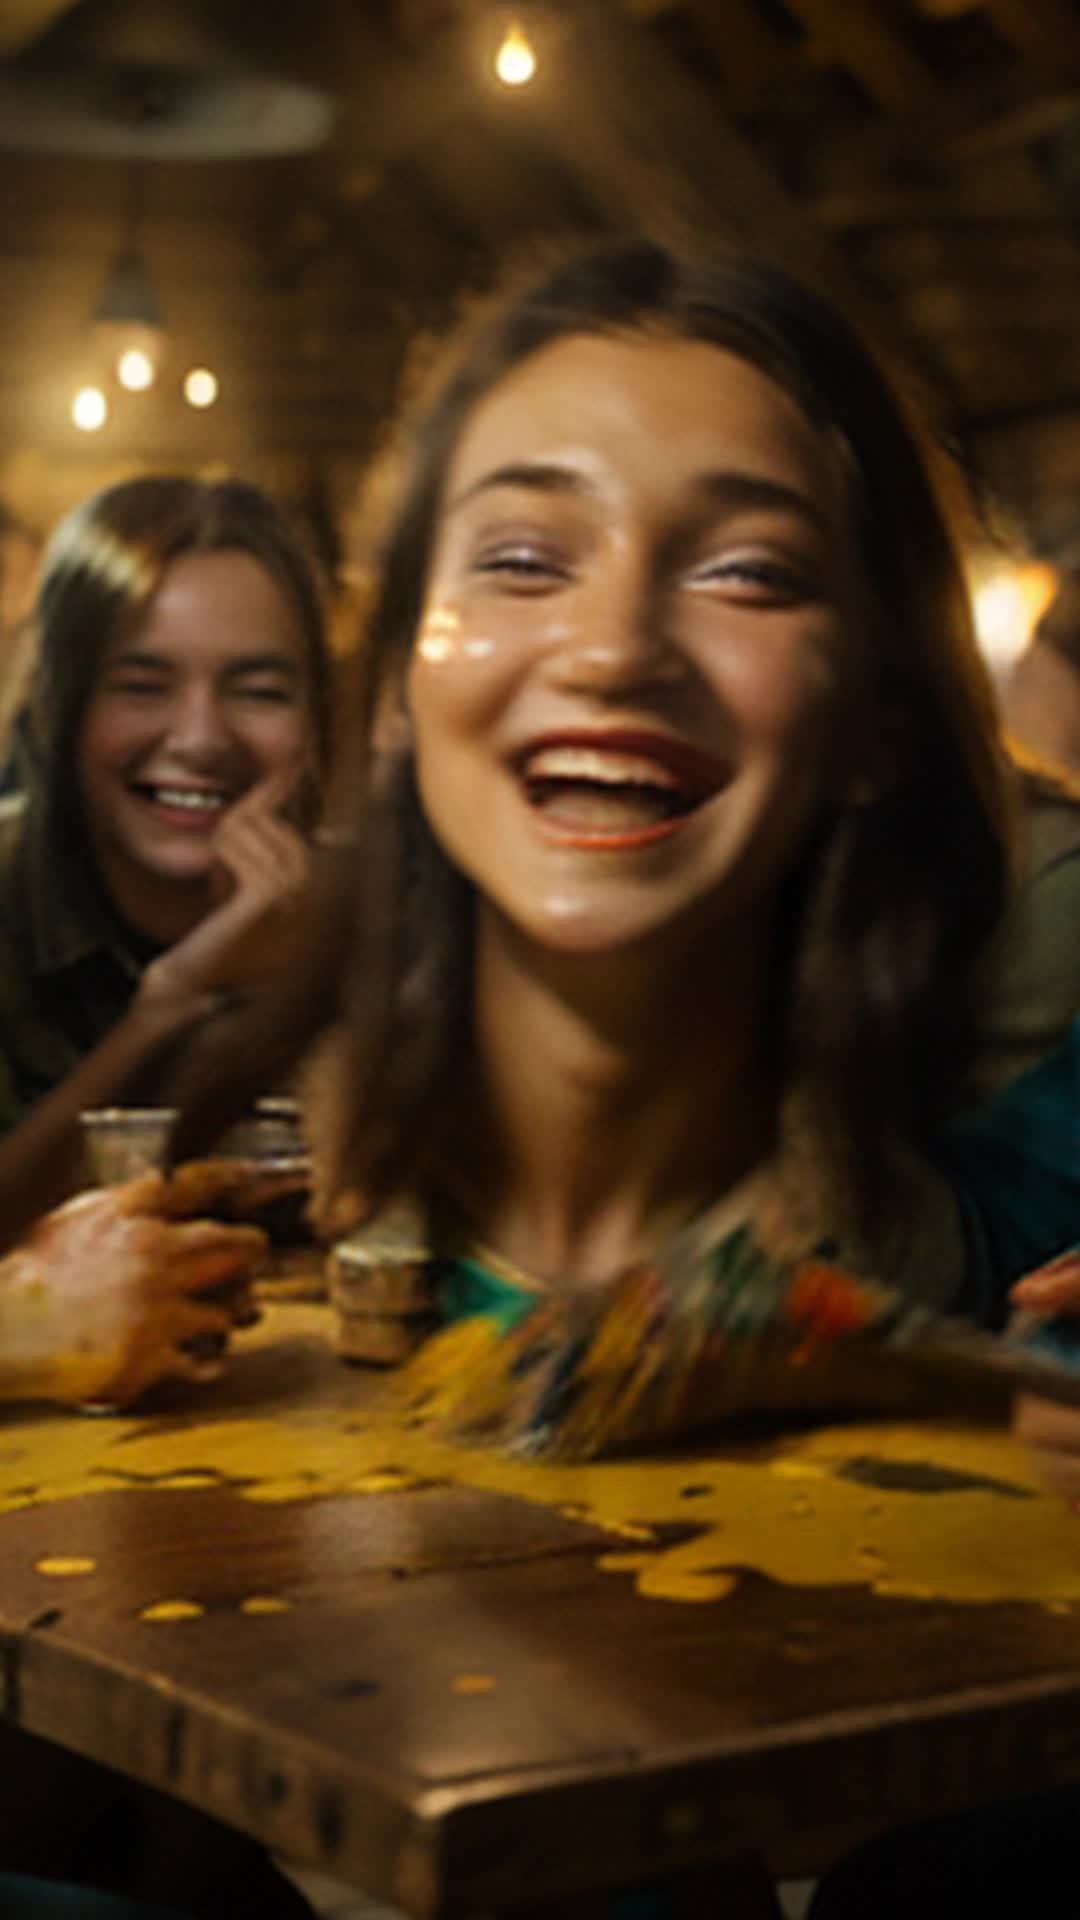 Group of young friends in creative debate, splattered paint around, lively discussions about art, rustic barn interior, cozy atmosphere, warm lighting, vivid colors, smiling faces, candid expressions